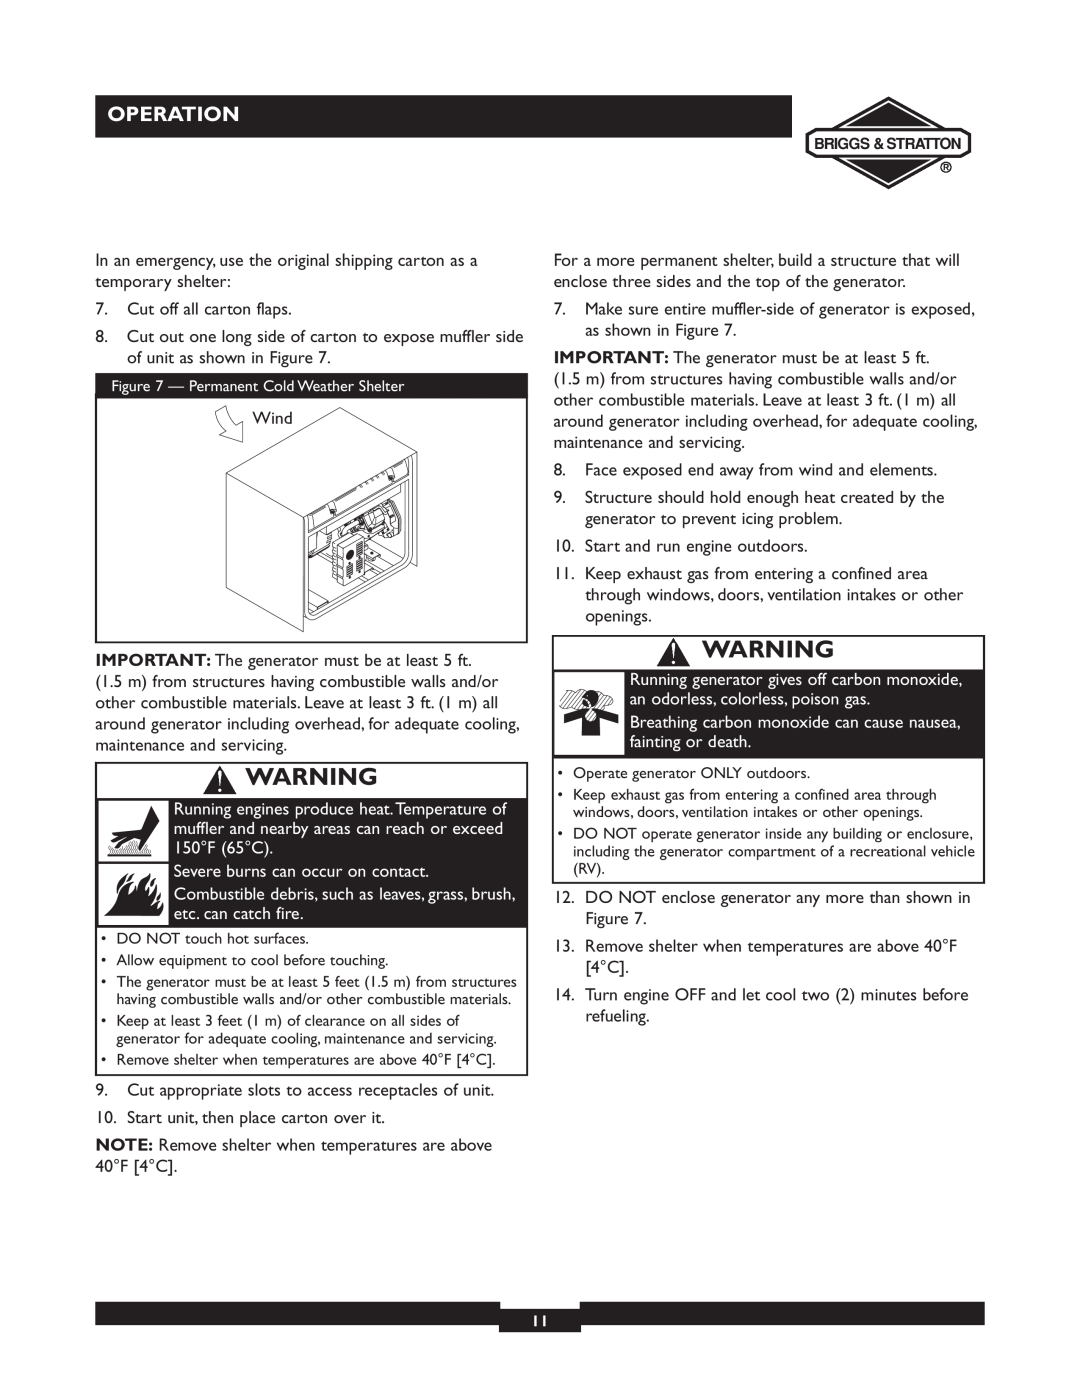 Briggs & Stratton 30238 owner manual Operation, Severe burns can occur on contact 